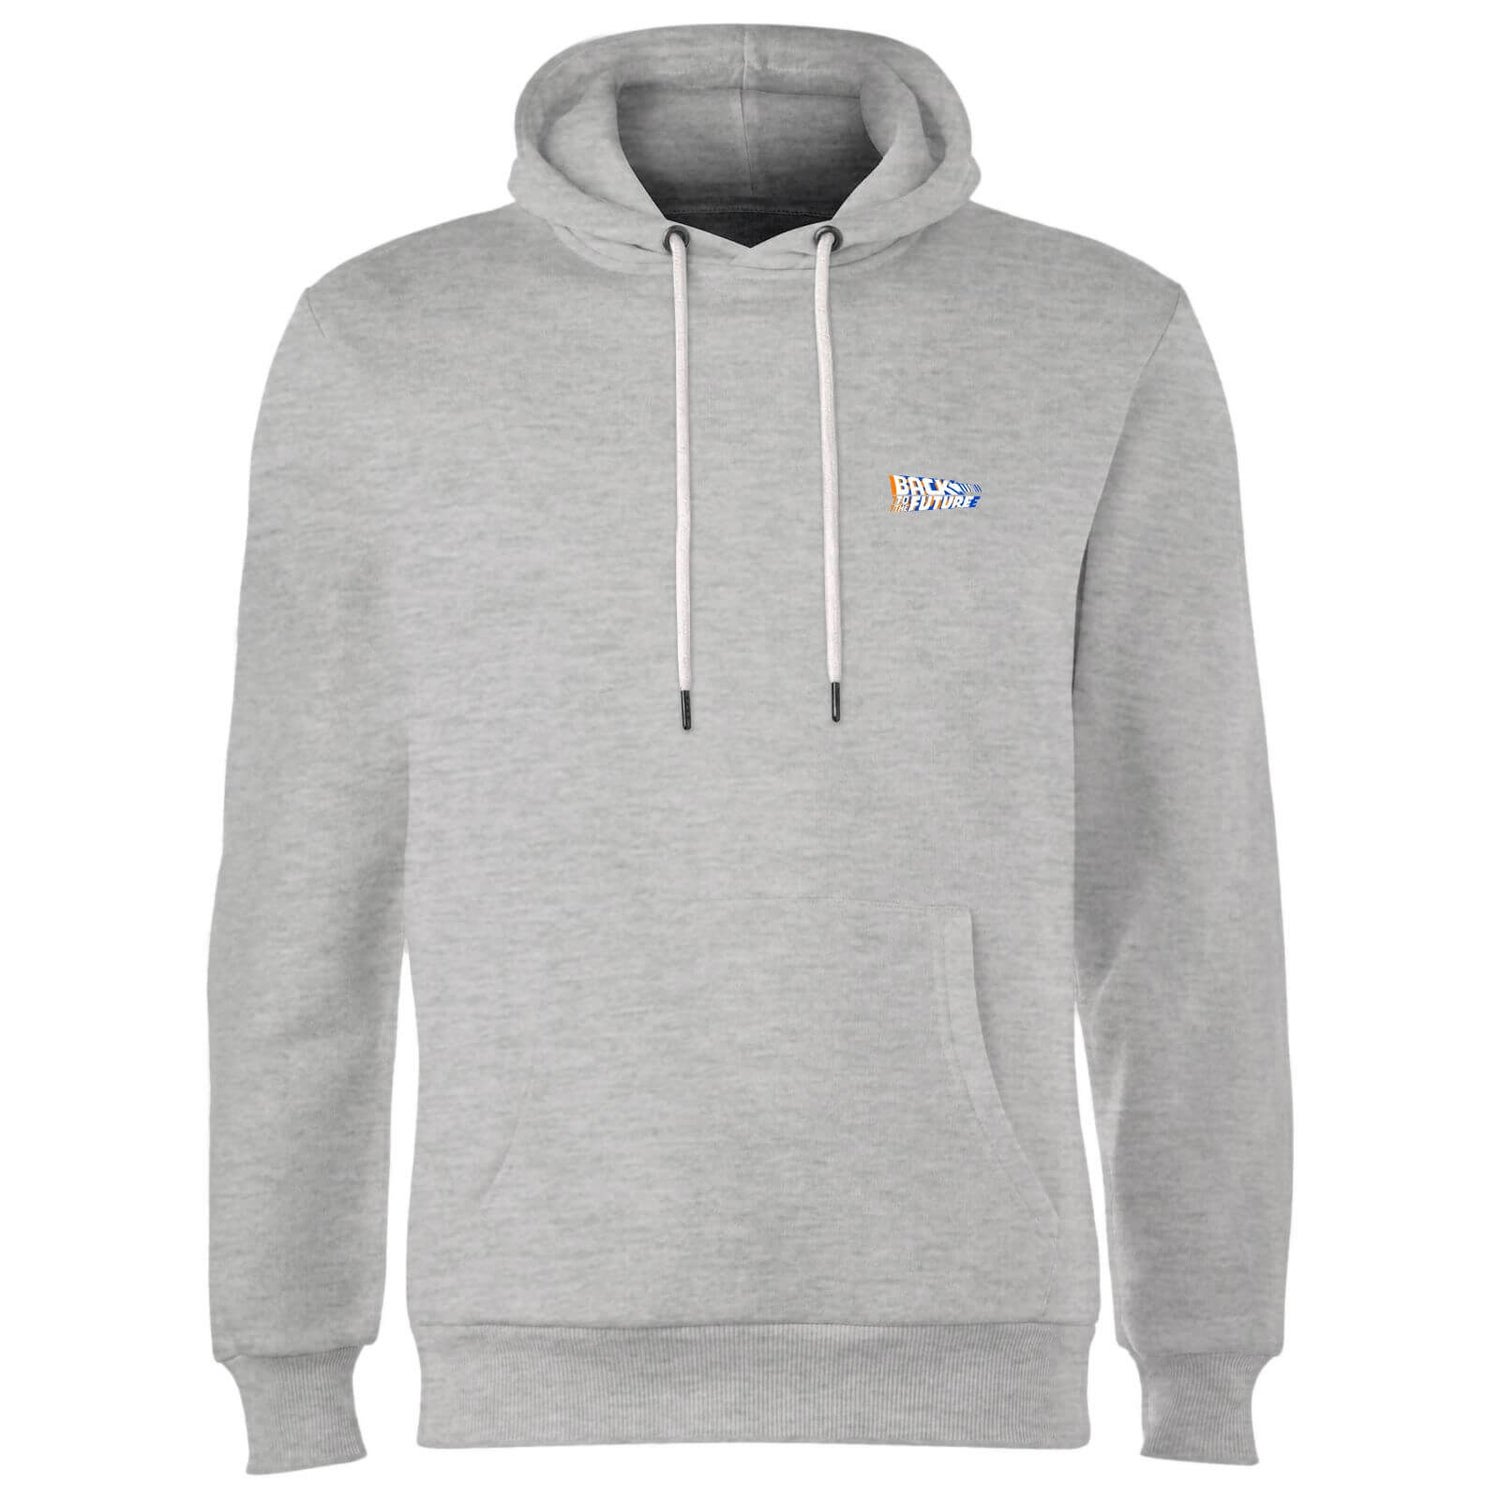 Back To The Future Hoodie - Grey